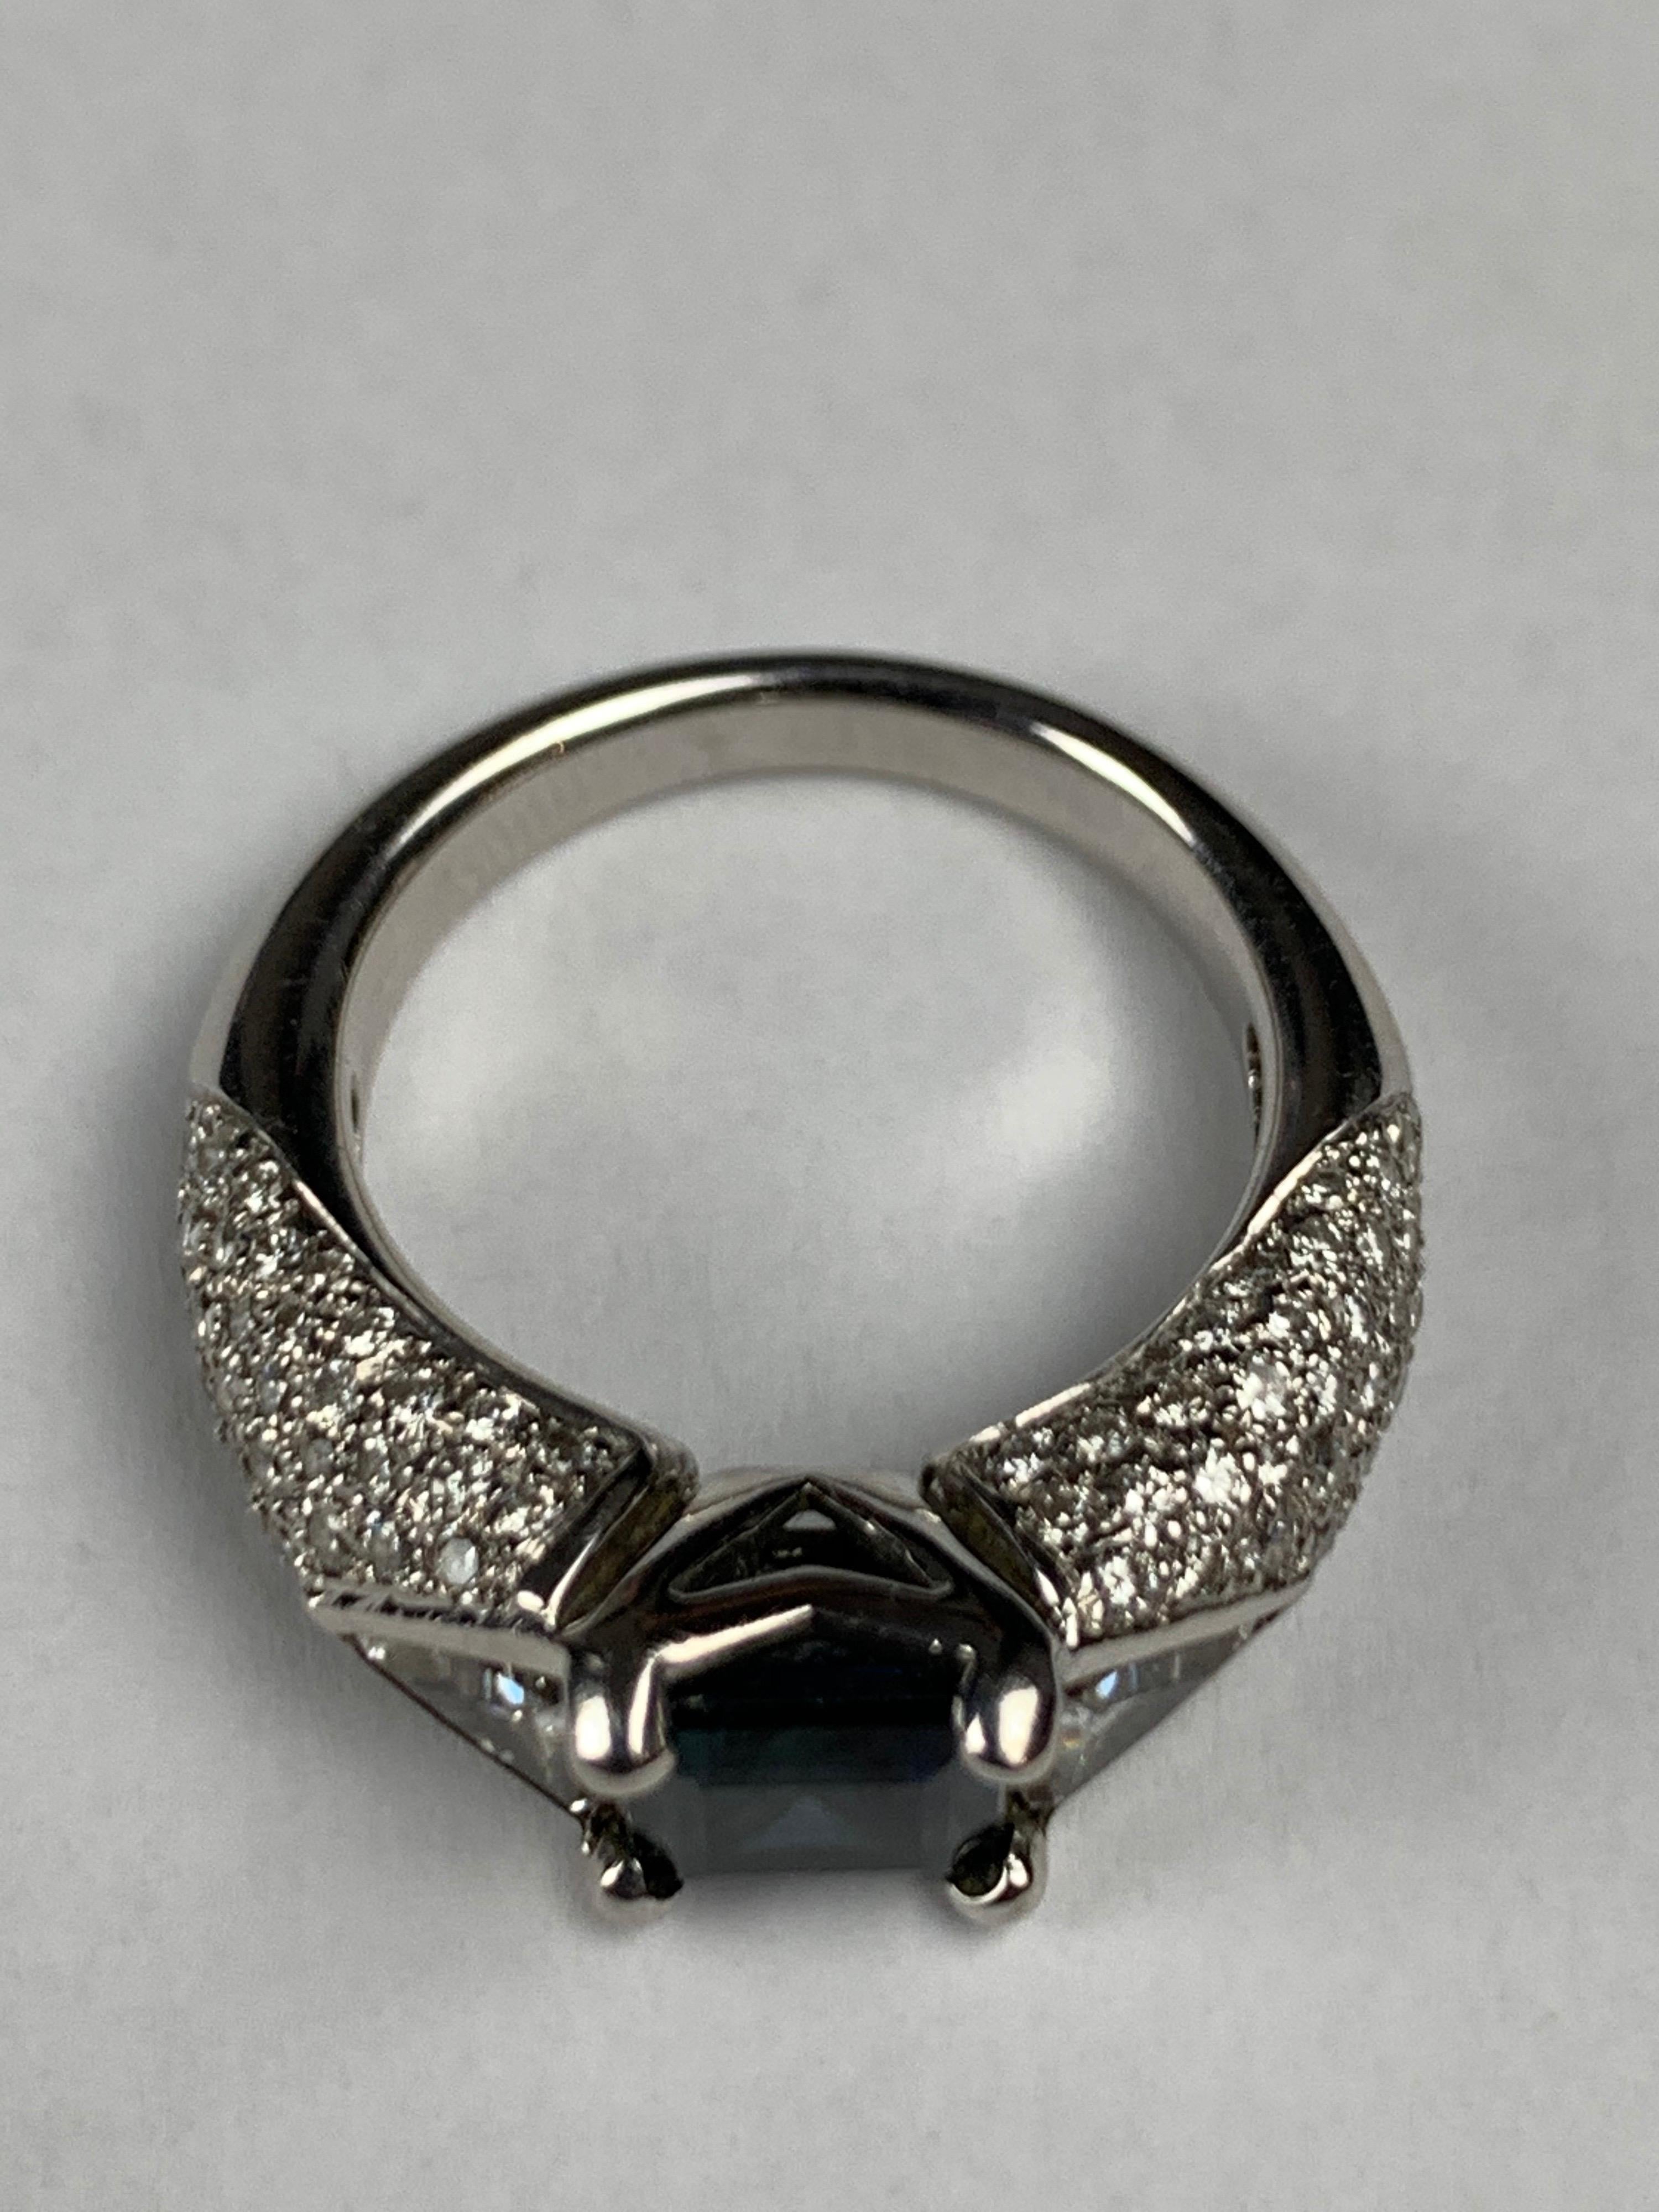 A Modern 18 Carat White Gold & Ceylon Sapphire 2 Carat Cocktail Ring With 2 Carat Diamond (G-S1)  Shoulders, Trilion Cuts And Pave Setting.
English Made.